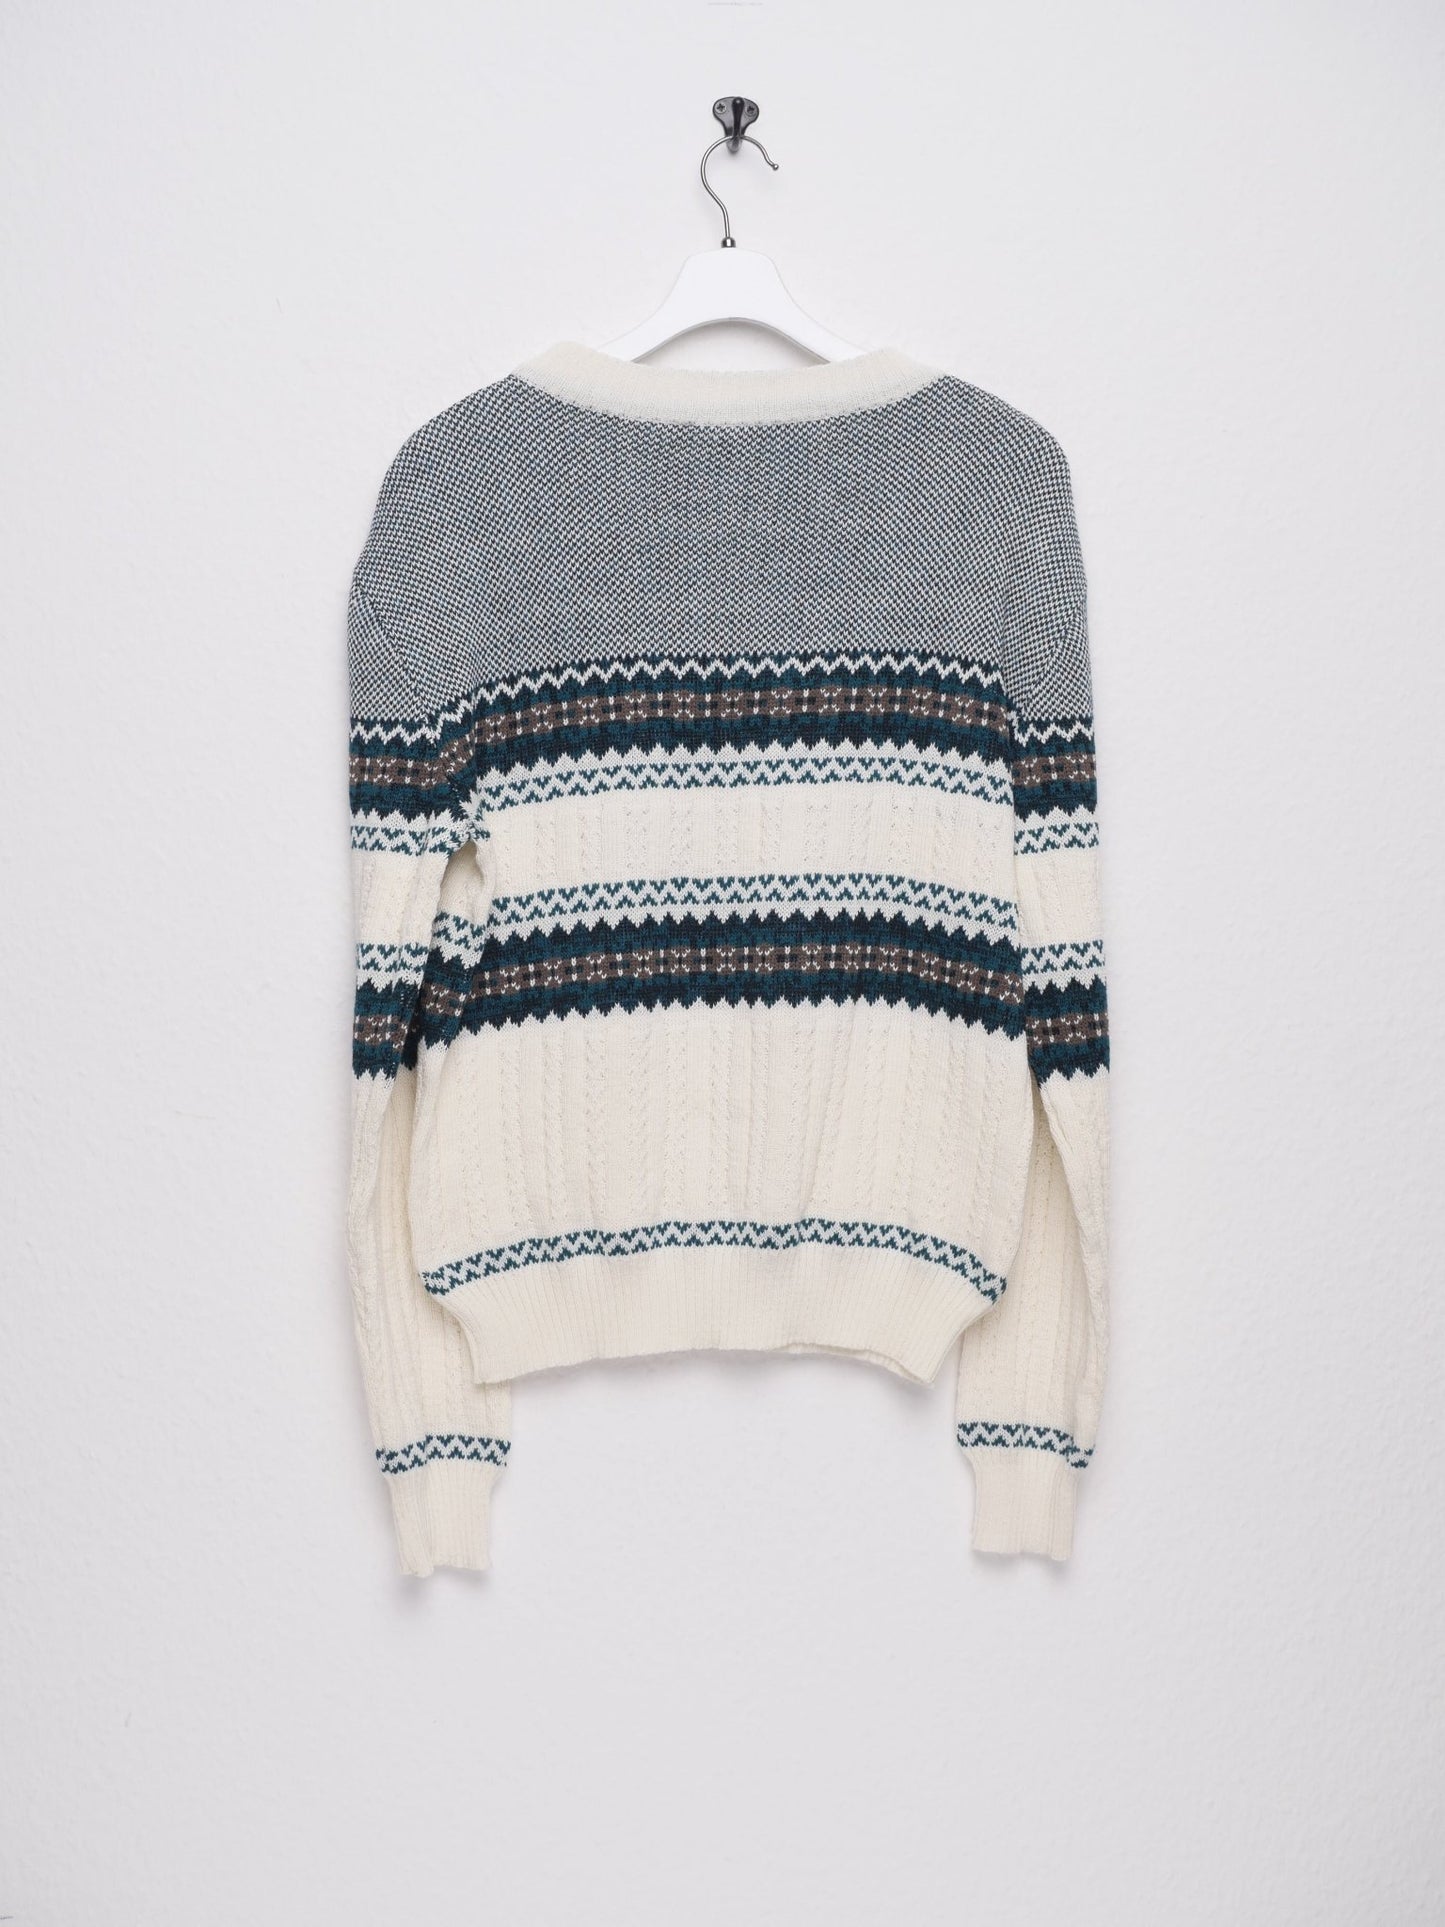 multicoloured patterned Knit Sweater - Peeces